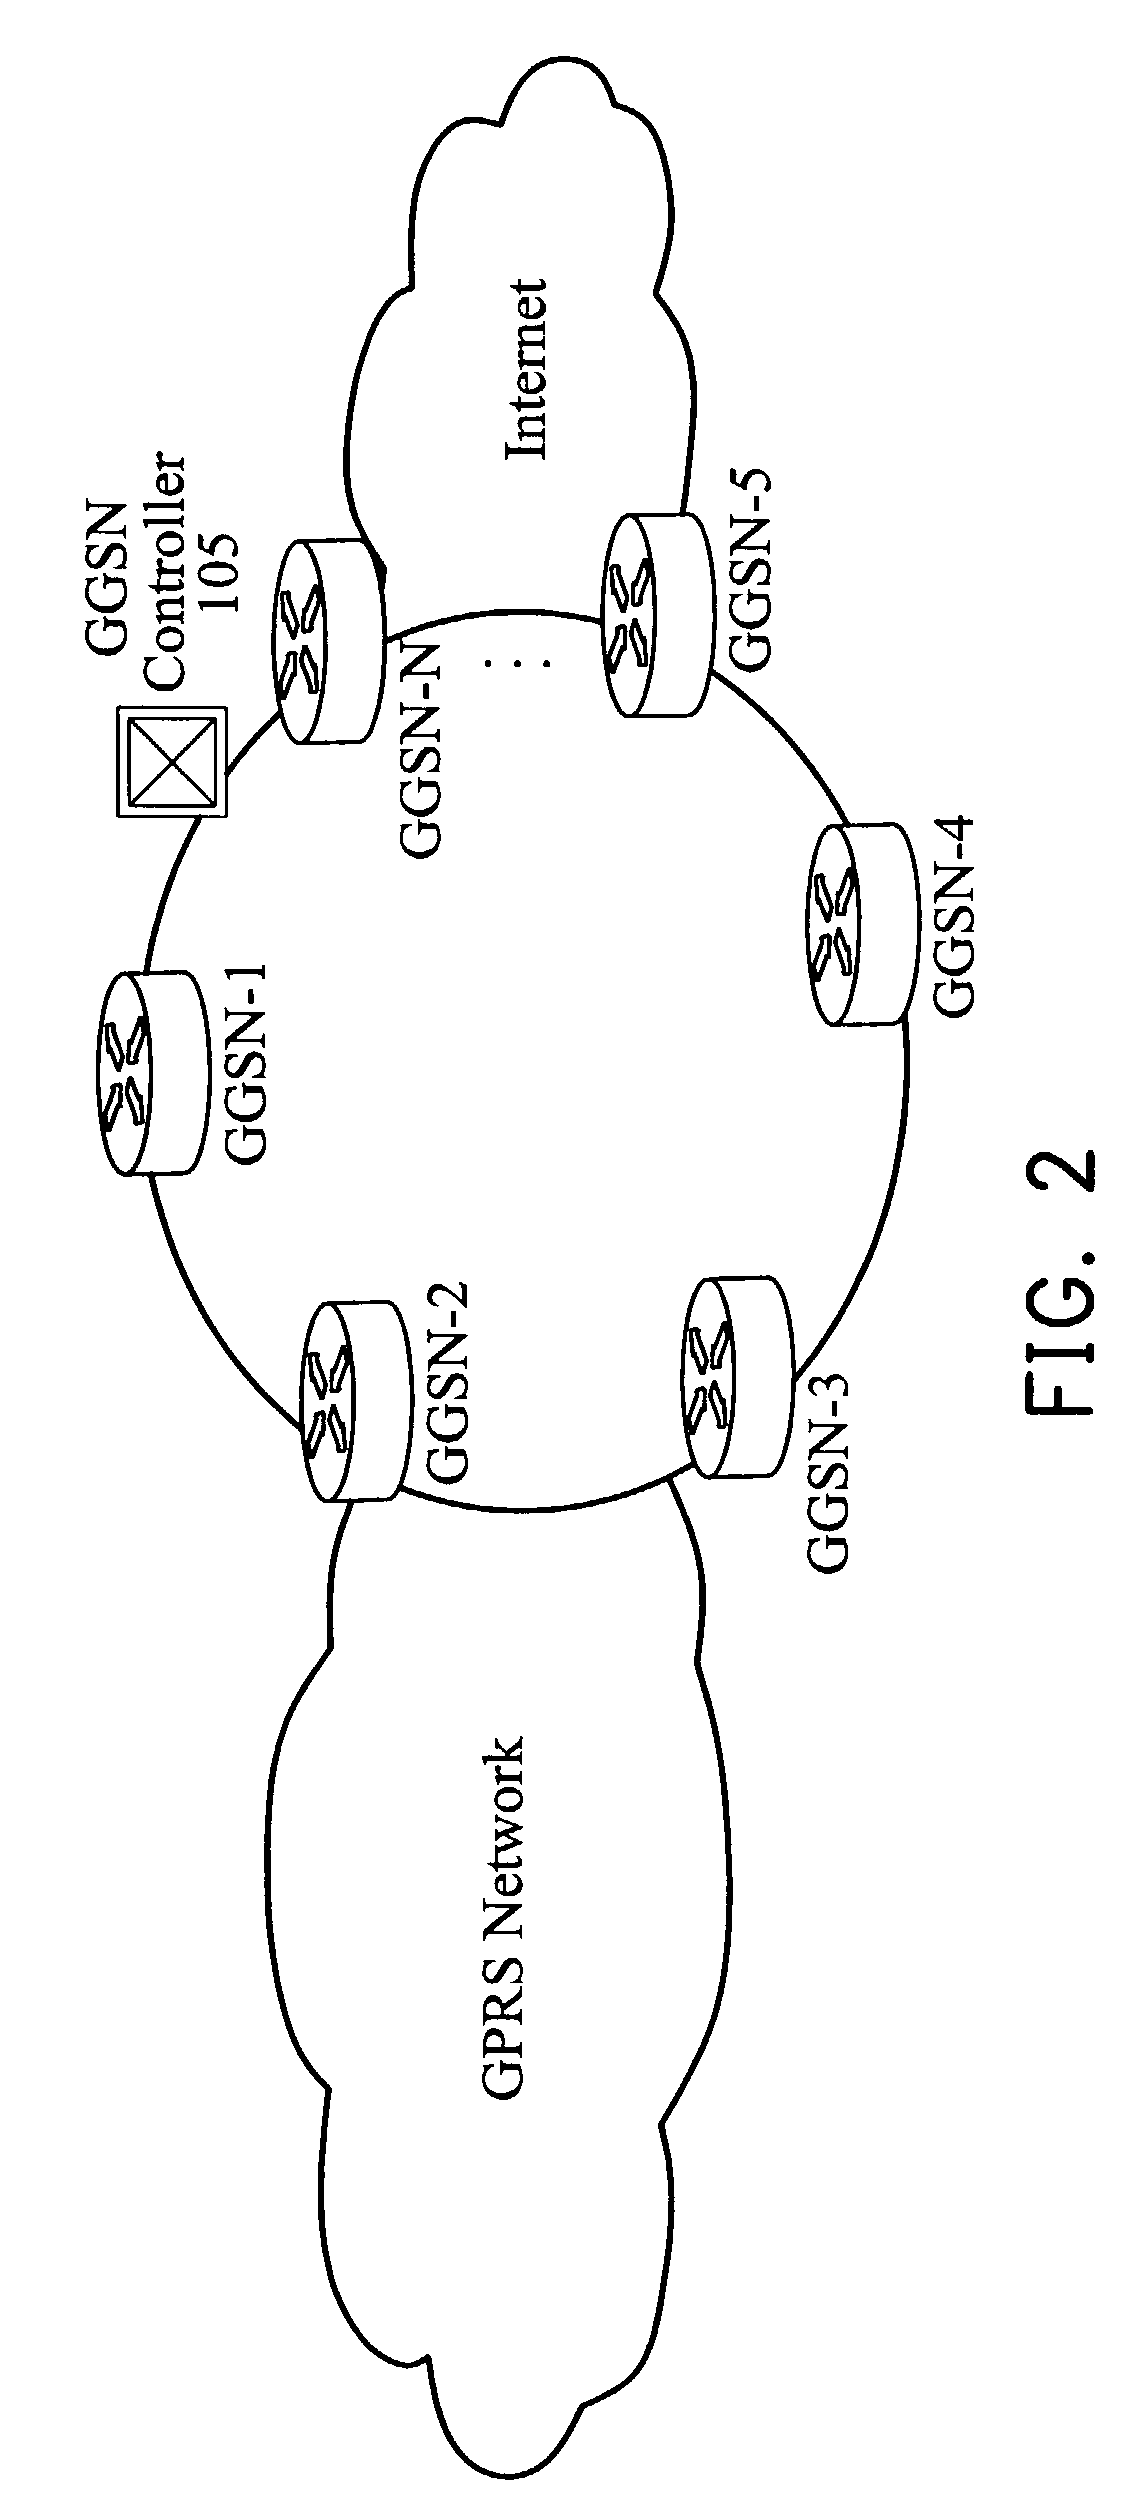 Re-allocation method for a distributed GGSN system